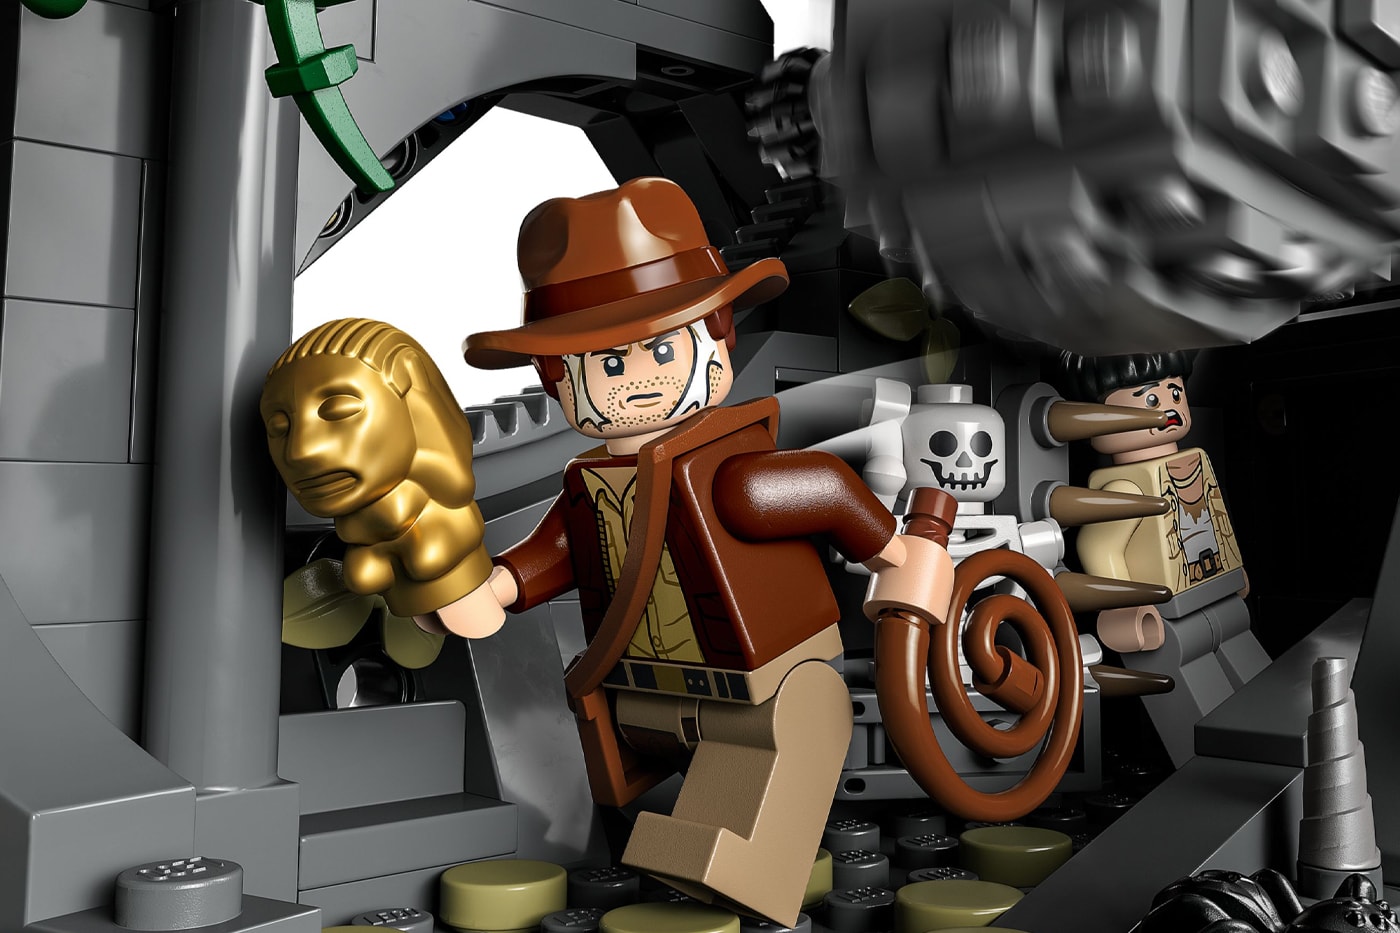 LEGO indiana Jones Temple of the Golden Idol  Escape from the Lost Tomb Fighter Plane Chase 77012 77015 77013 release info